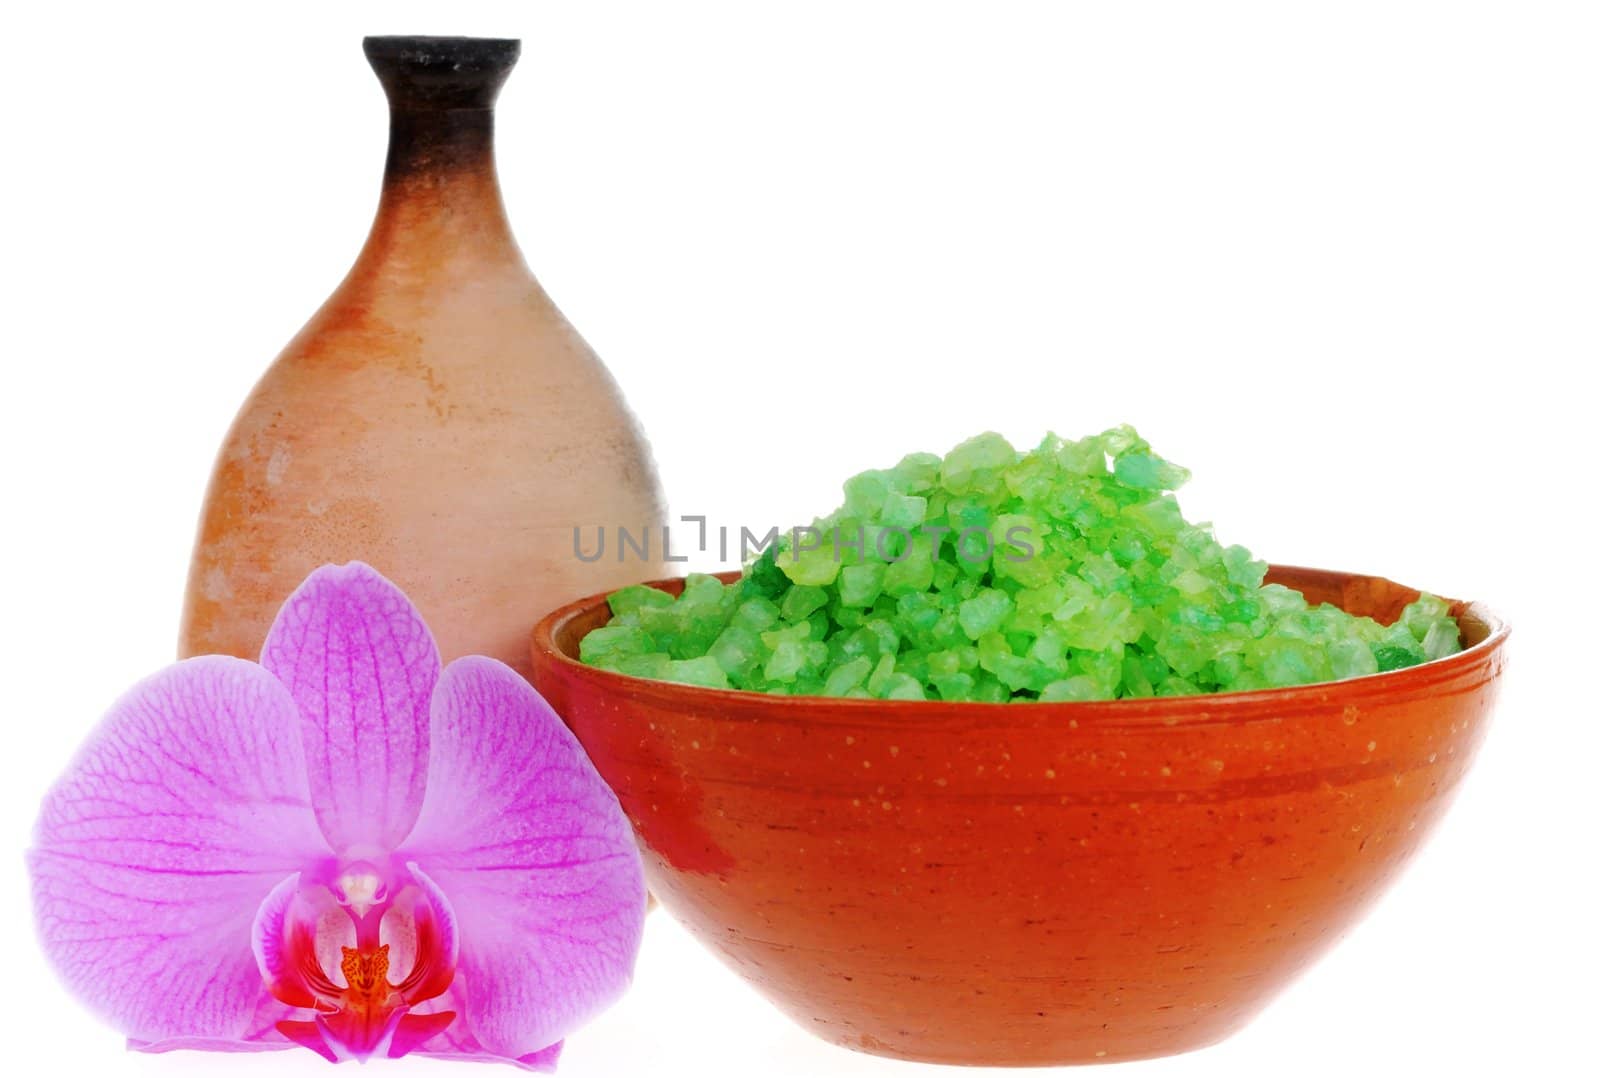 Old-fashioned dish with salt for bath, orchid flower and jug on white background. Focus on the flower.